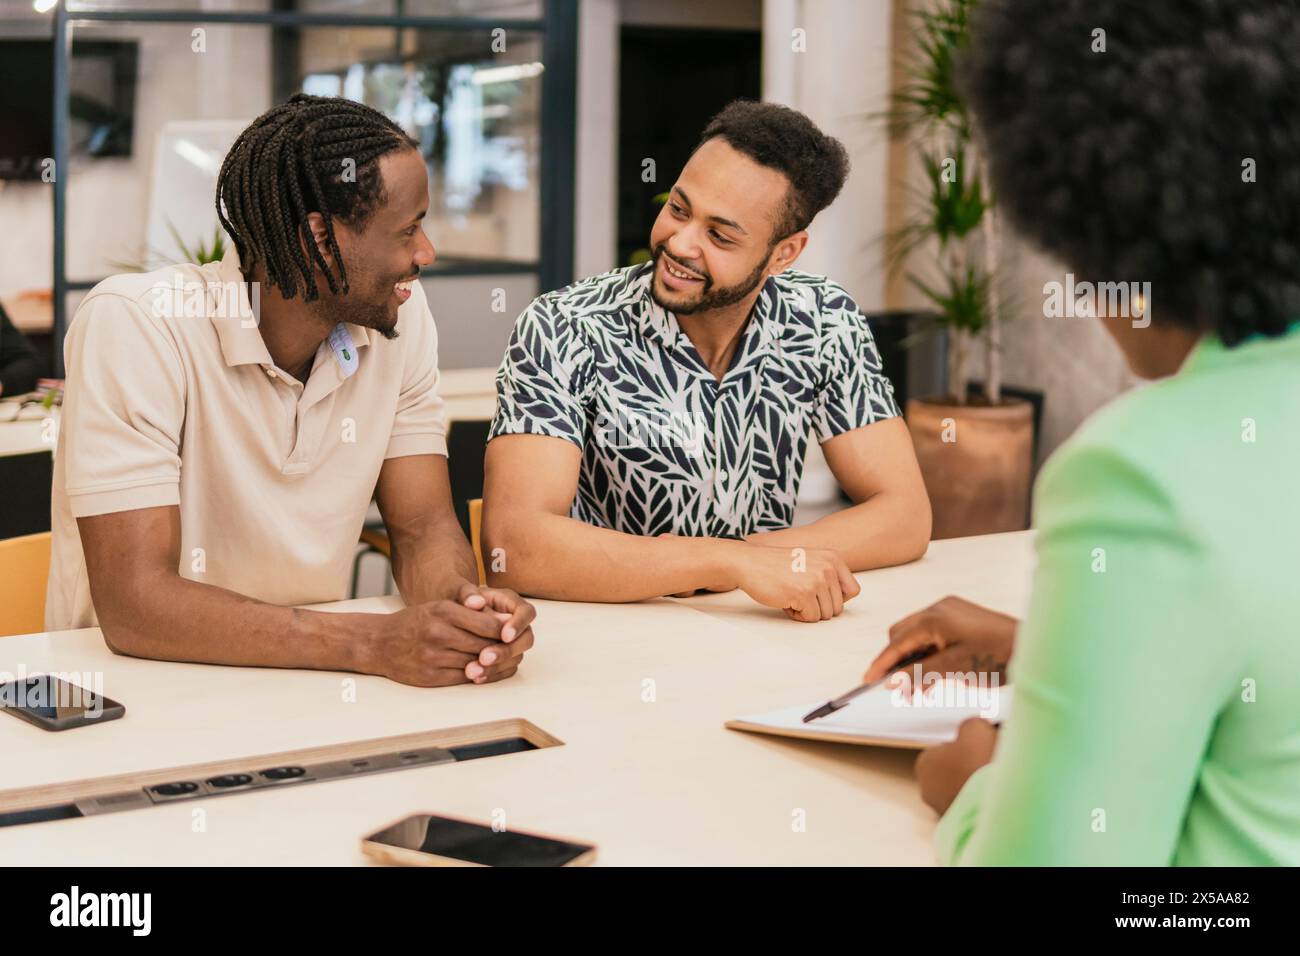 Three professionals are having a friendly and collaborative discussion in a modern coworking space environment Stock Photo